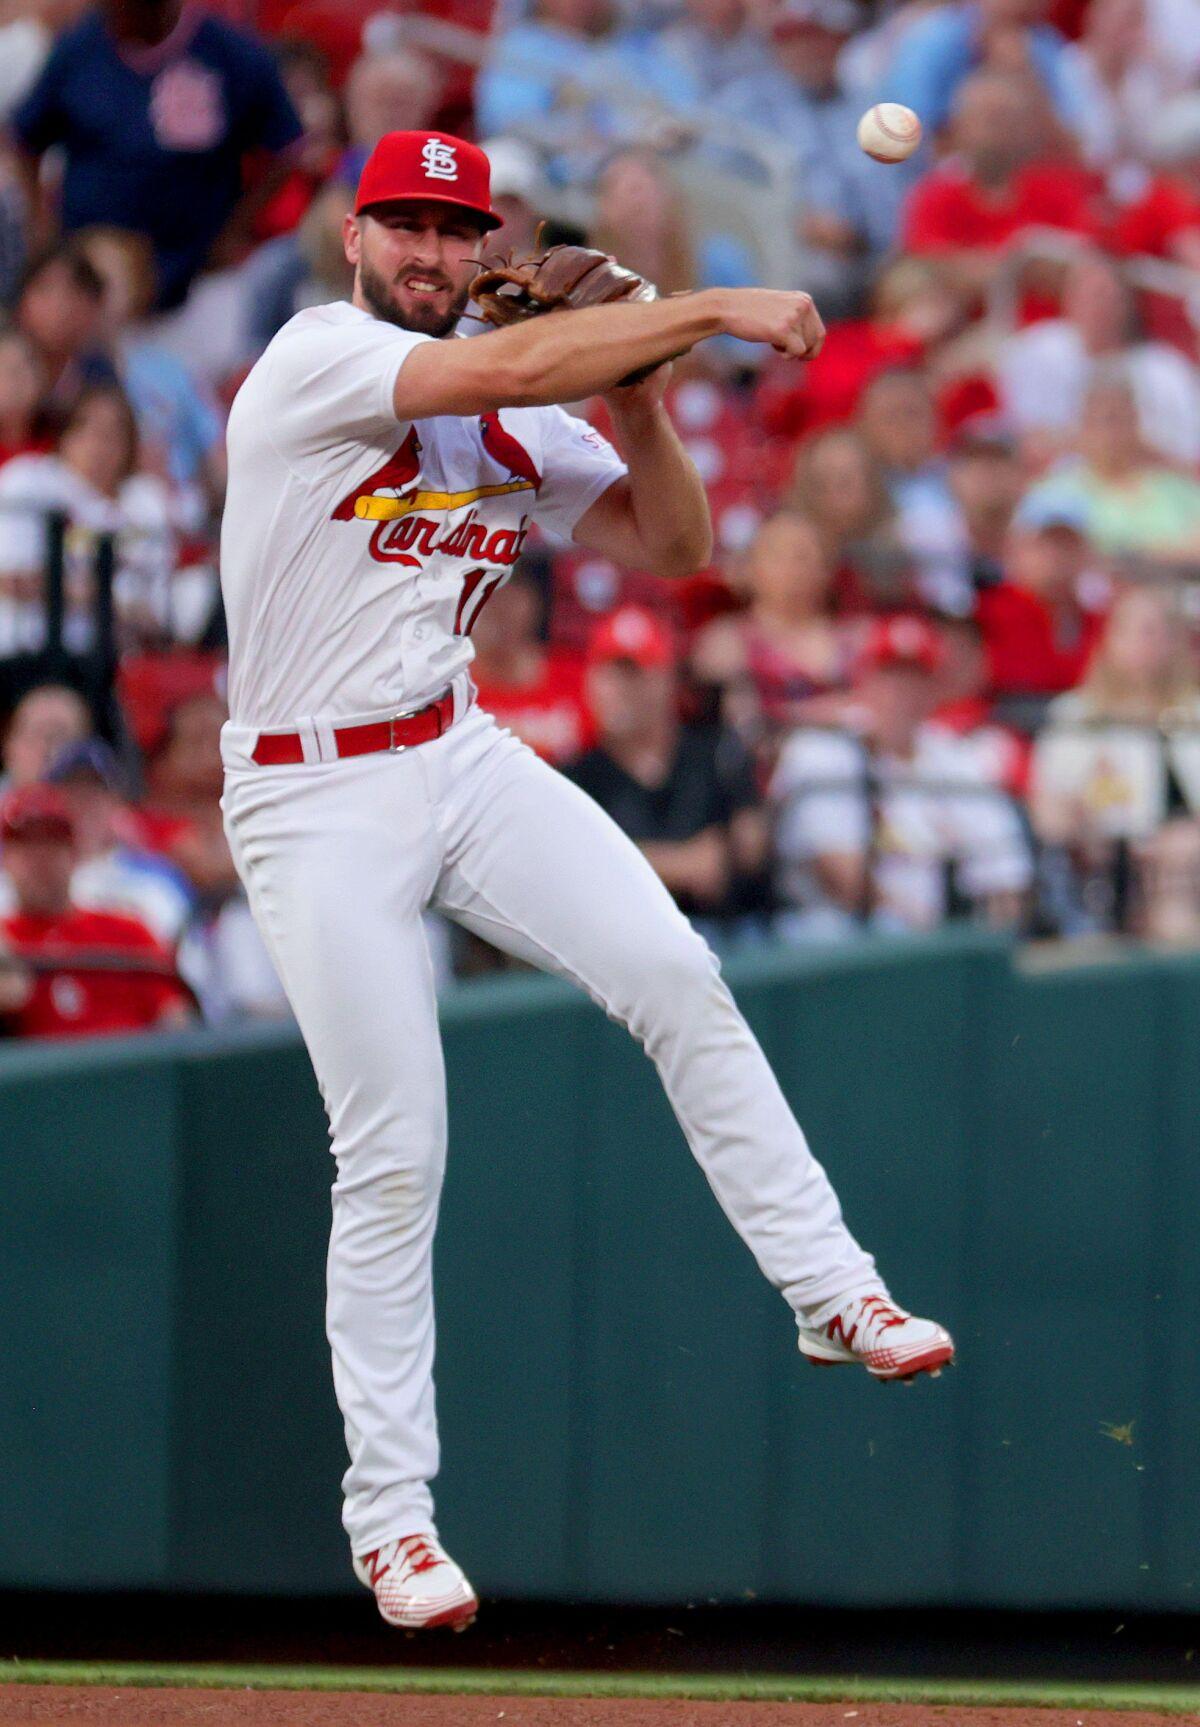 Jack set the tone': Flaherty delivers loud statement in Cardinals' romp.  But he wasn't alone